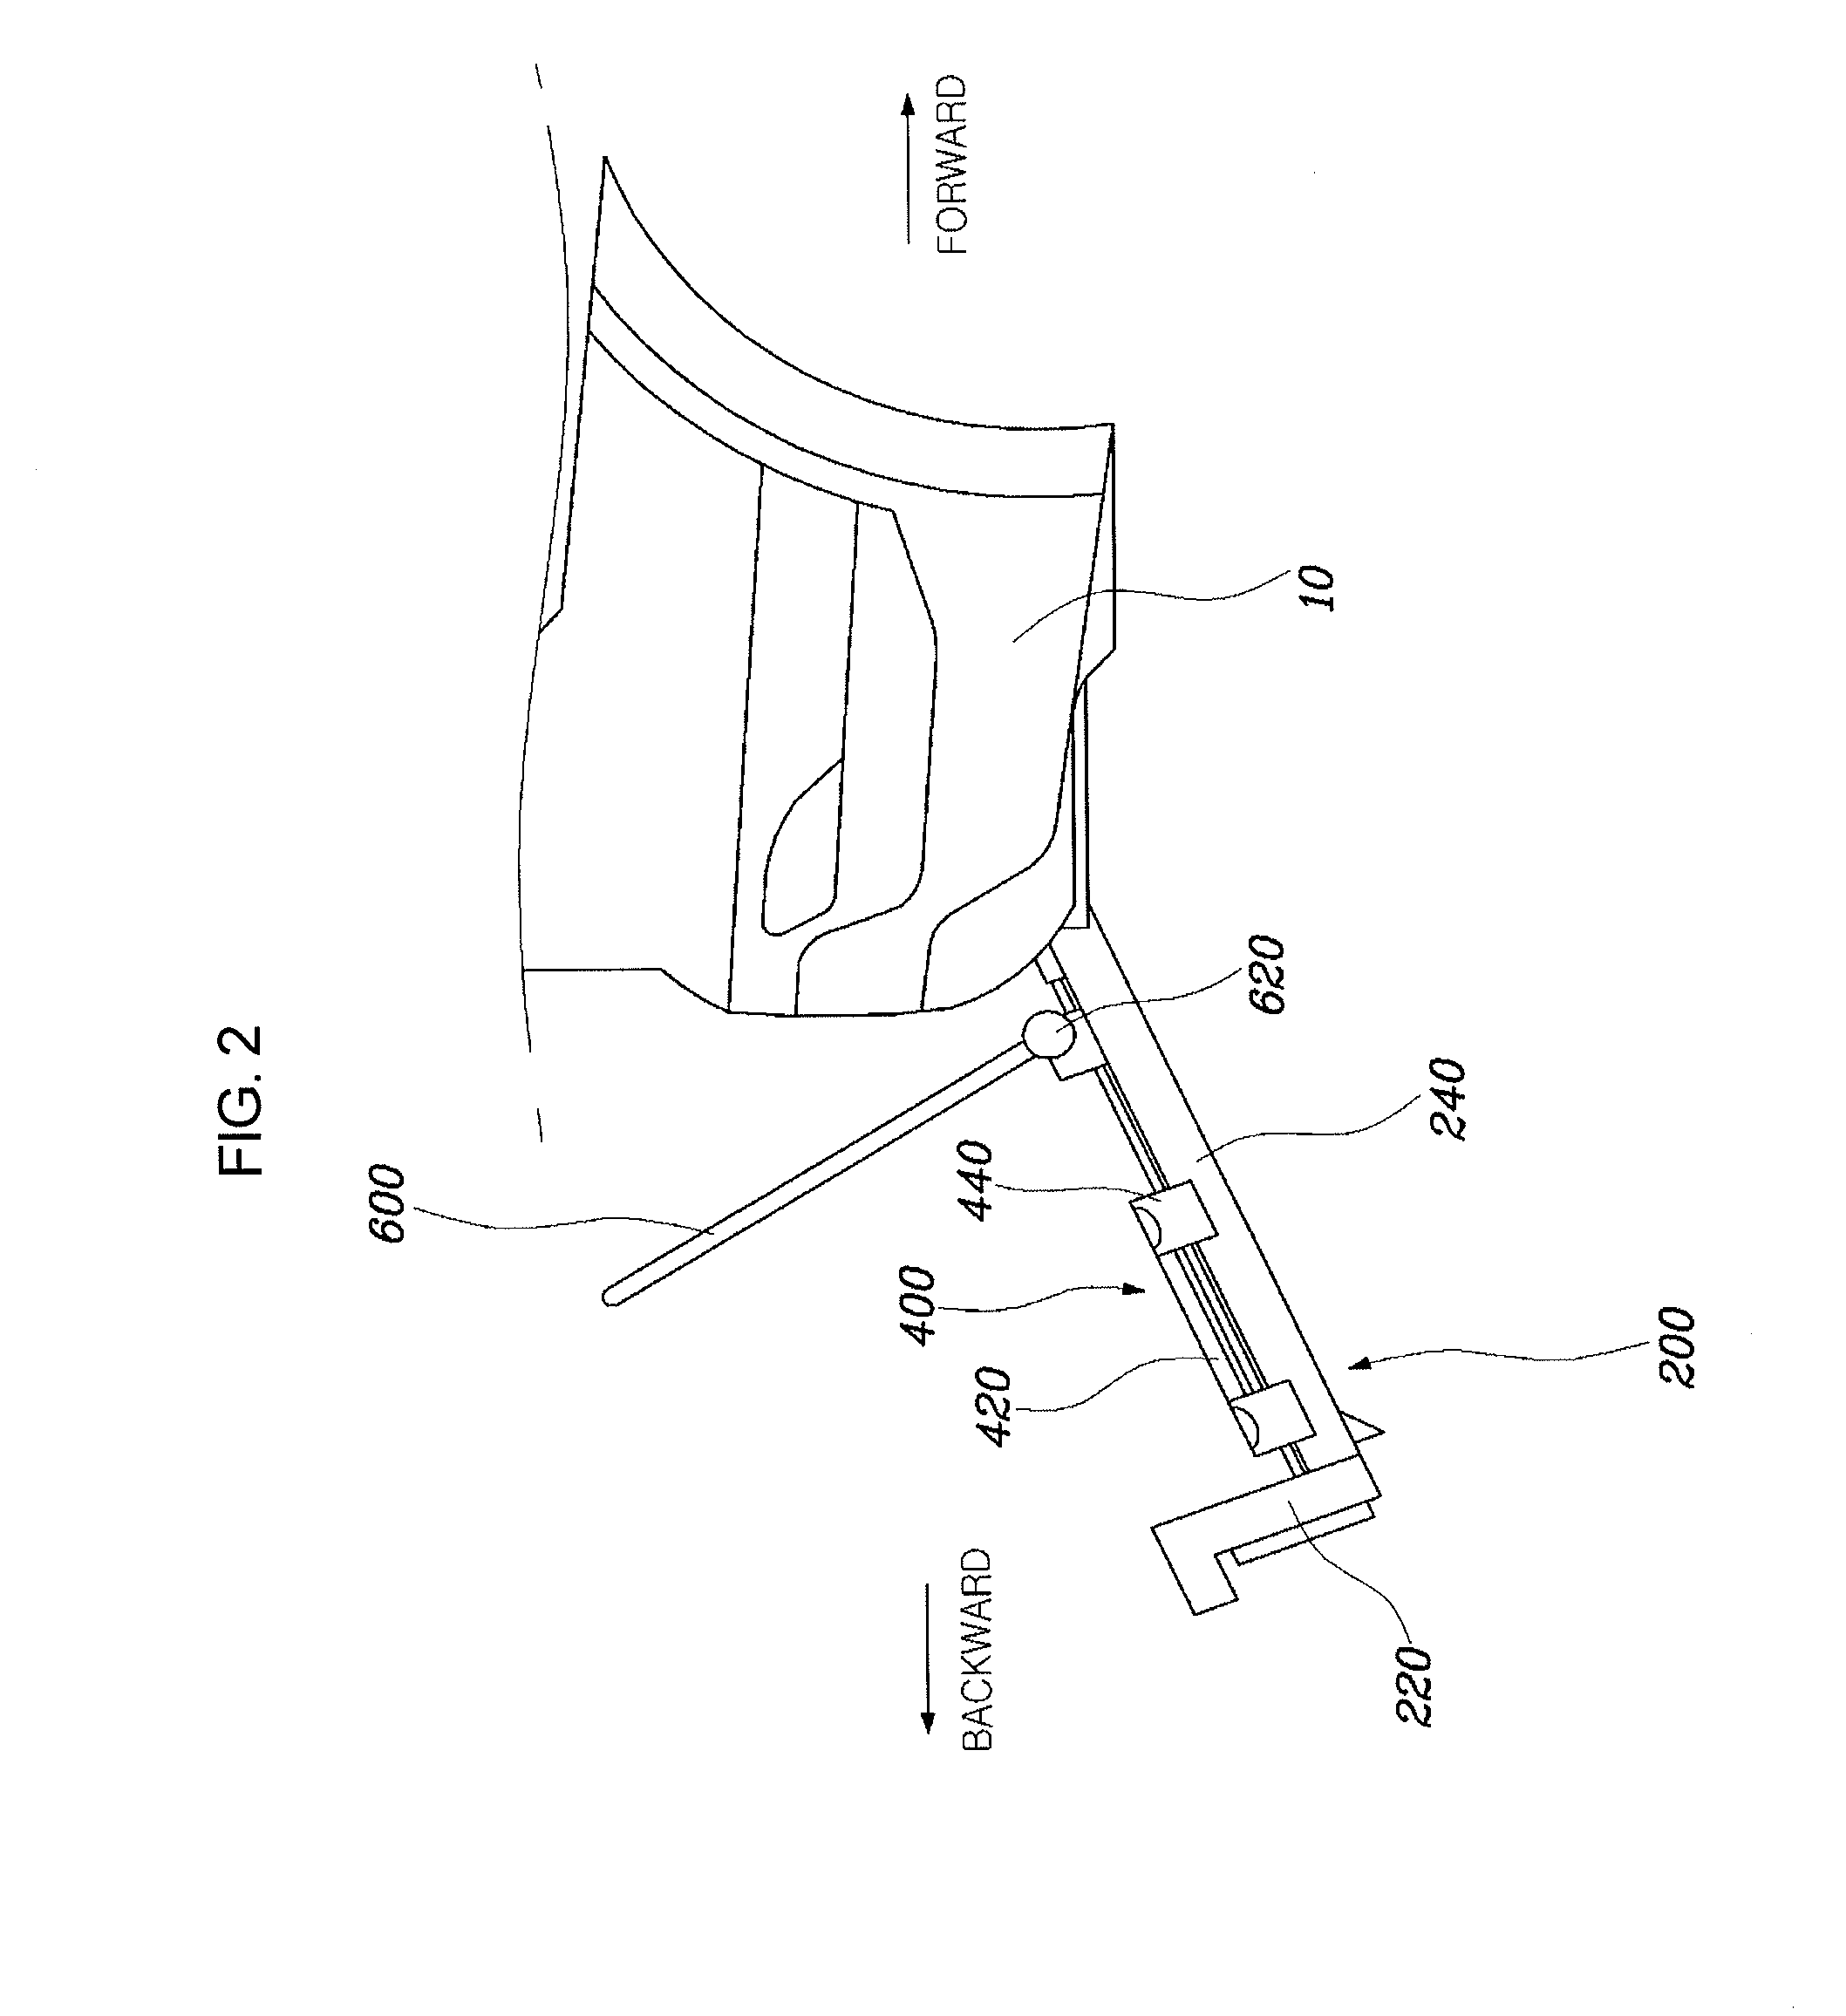 Bicycle carrier system for vehicle